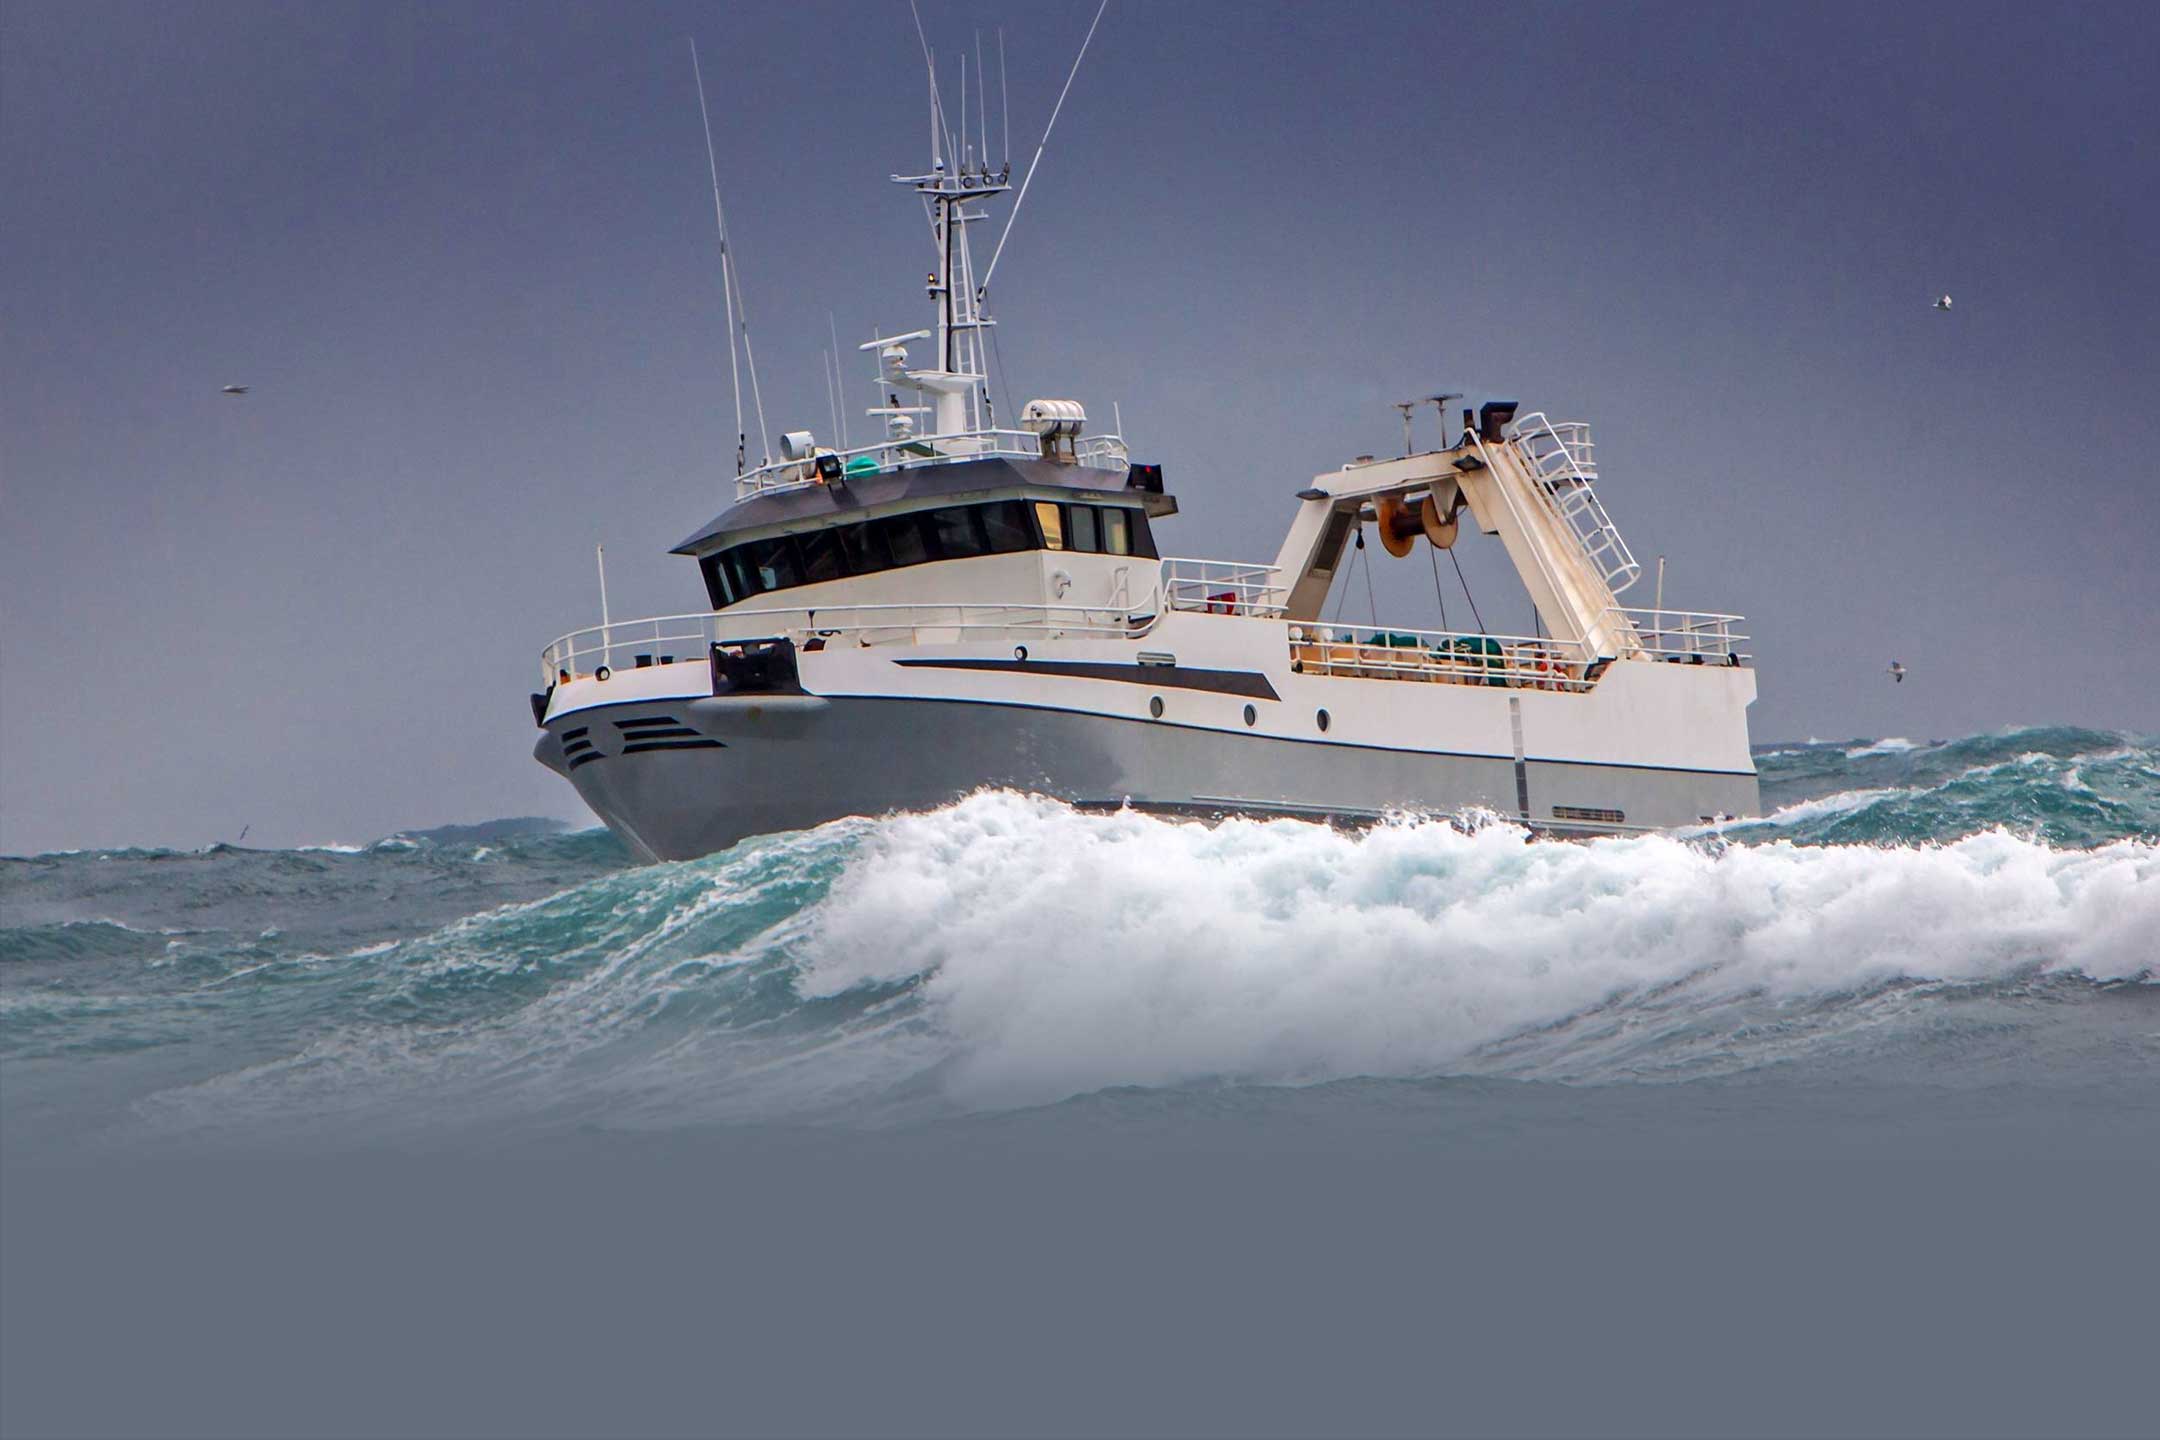 Our versatile coolant recovery tanks are used in the most demanding applications like this off shore fishing rig.